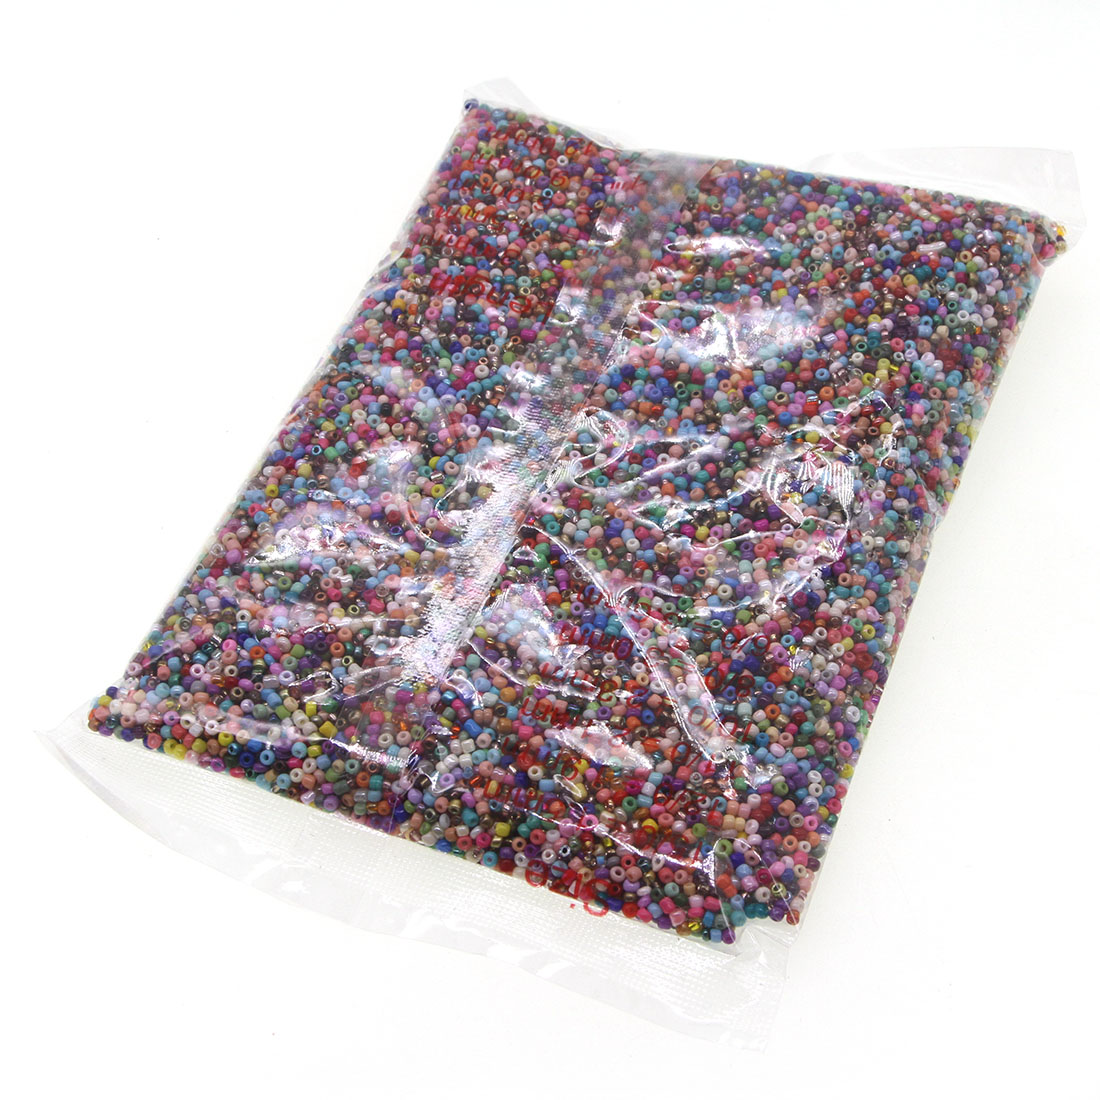 Mixed color 2mm 30,000 packs